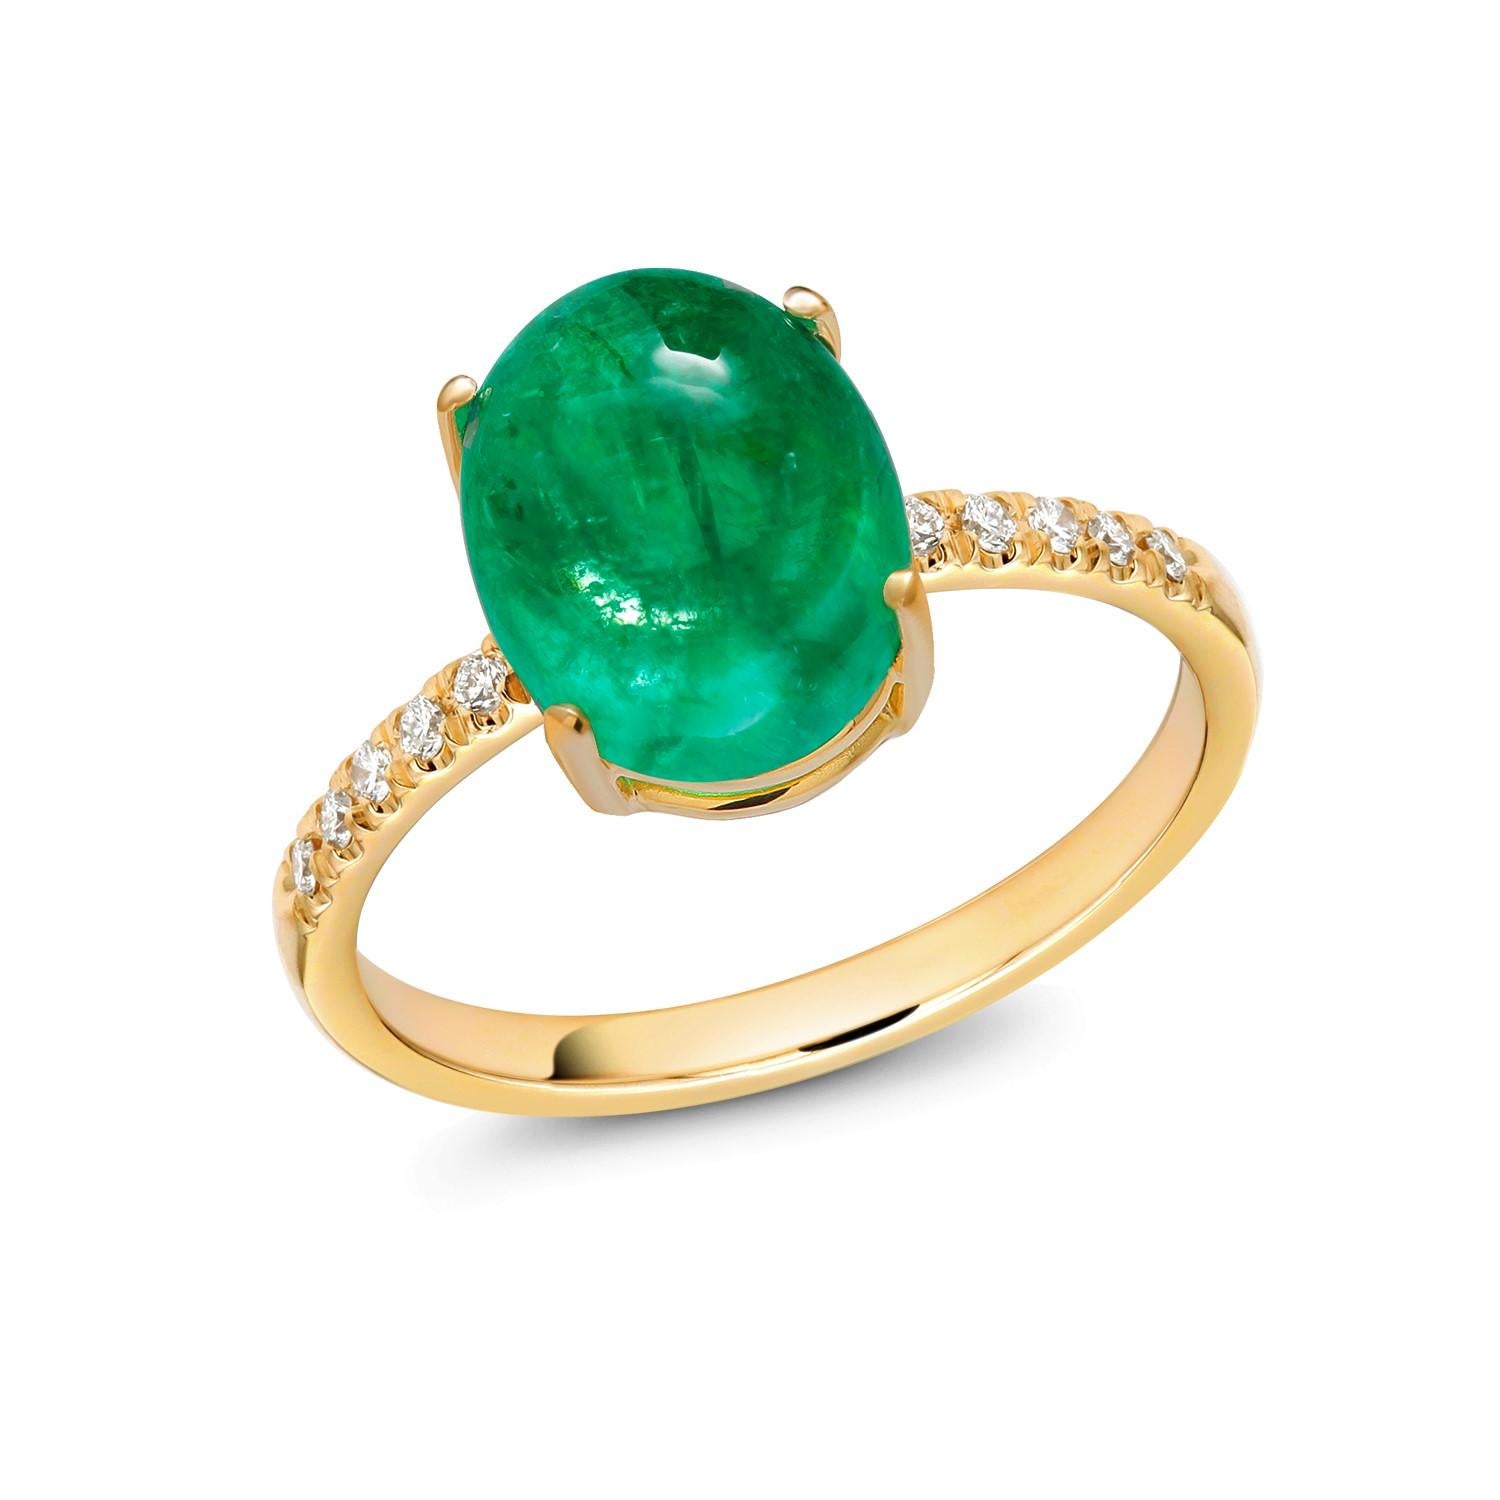 Cabochon Emerald and Diamonds Yellow Gold Cocktail Ring Weighing 7.05 Carat 1